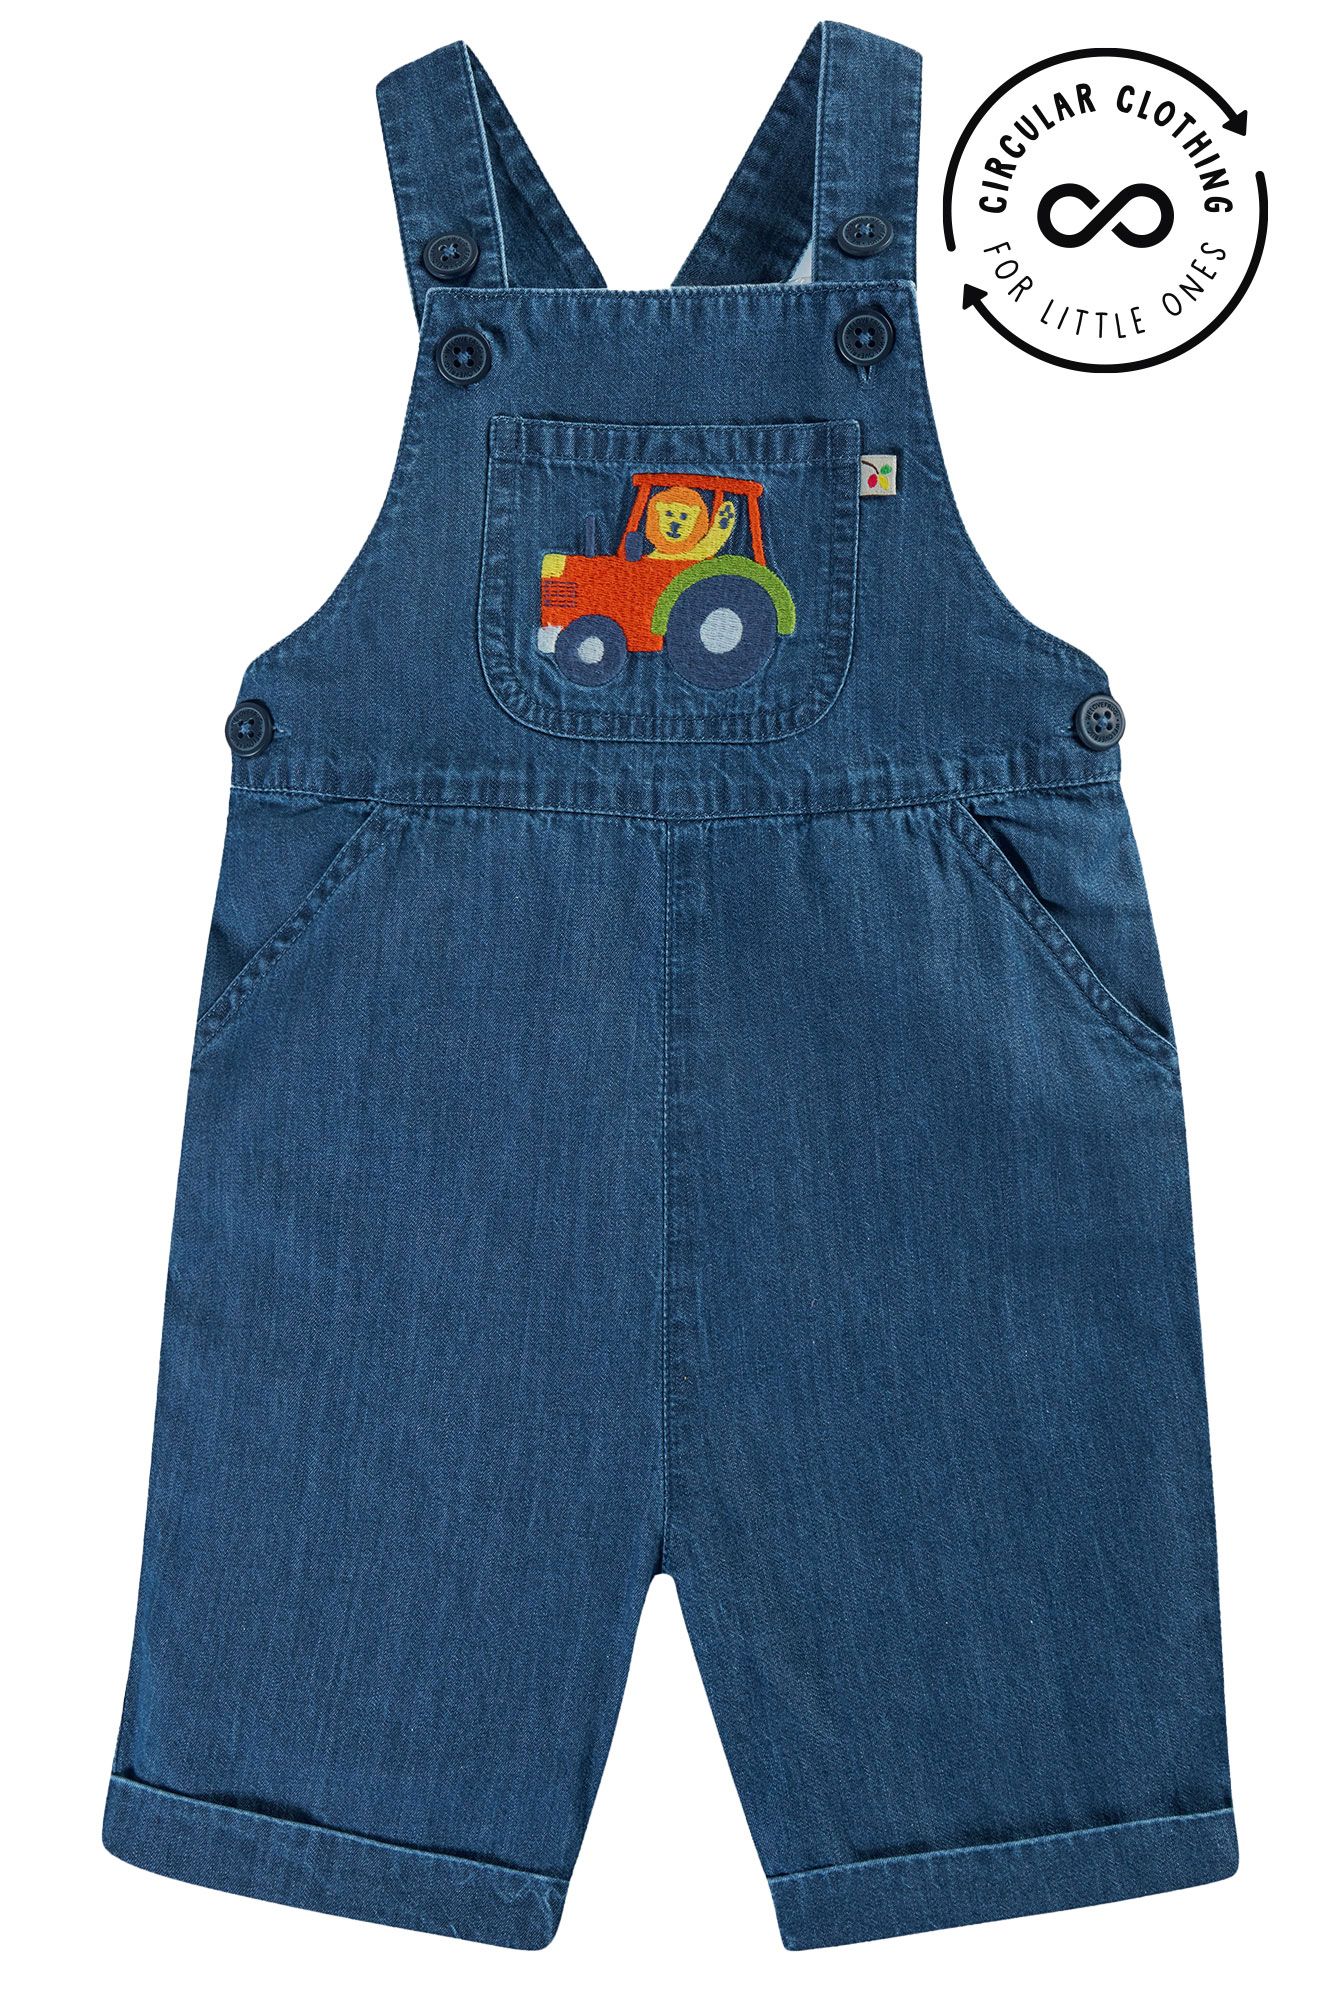 Carnkie Chambray Dungarees